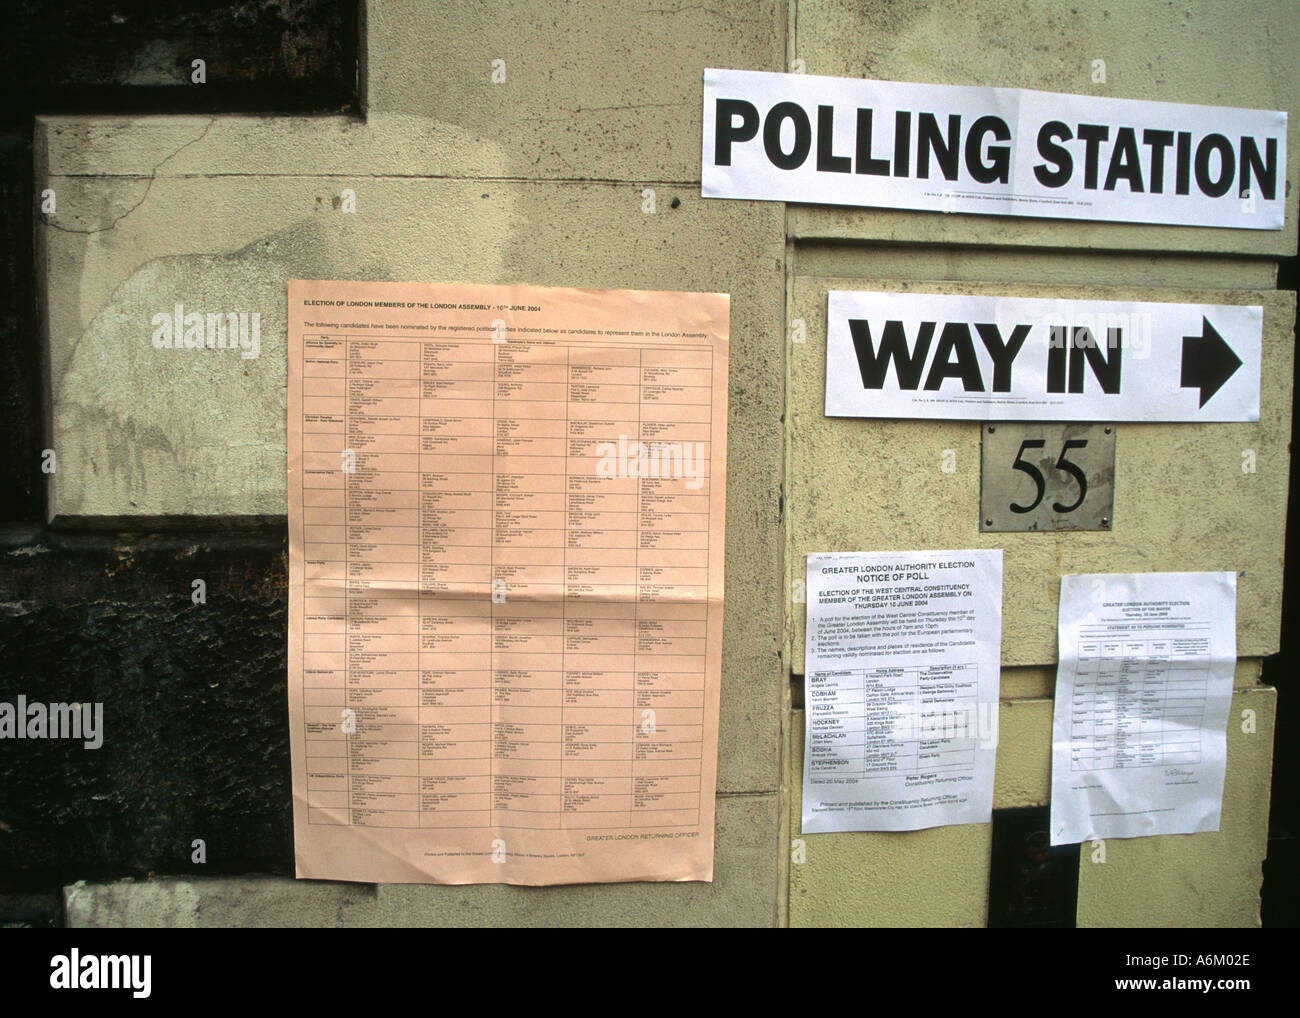 Polling station central London mayoral election 2004 Stock Photo